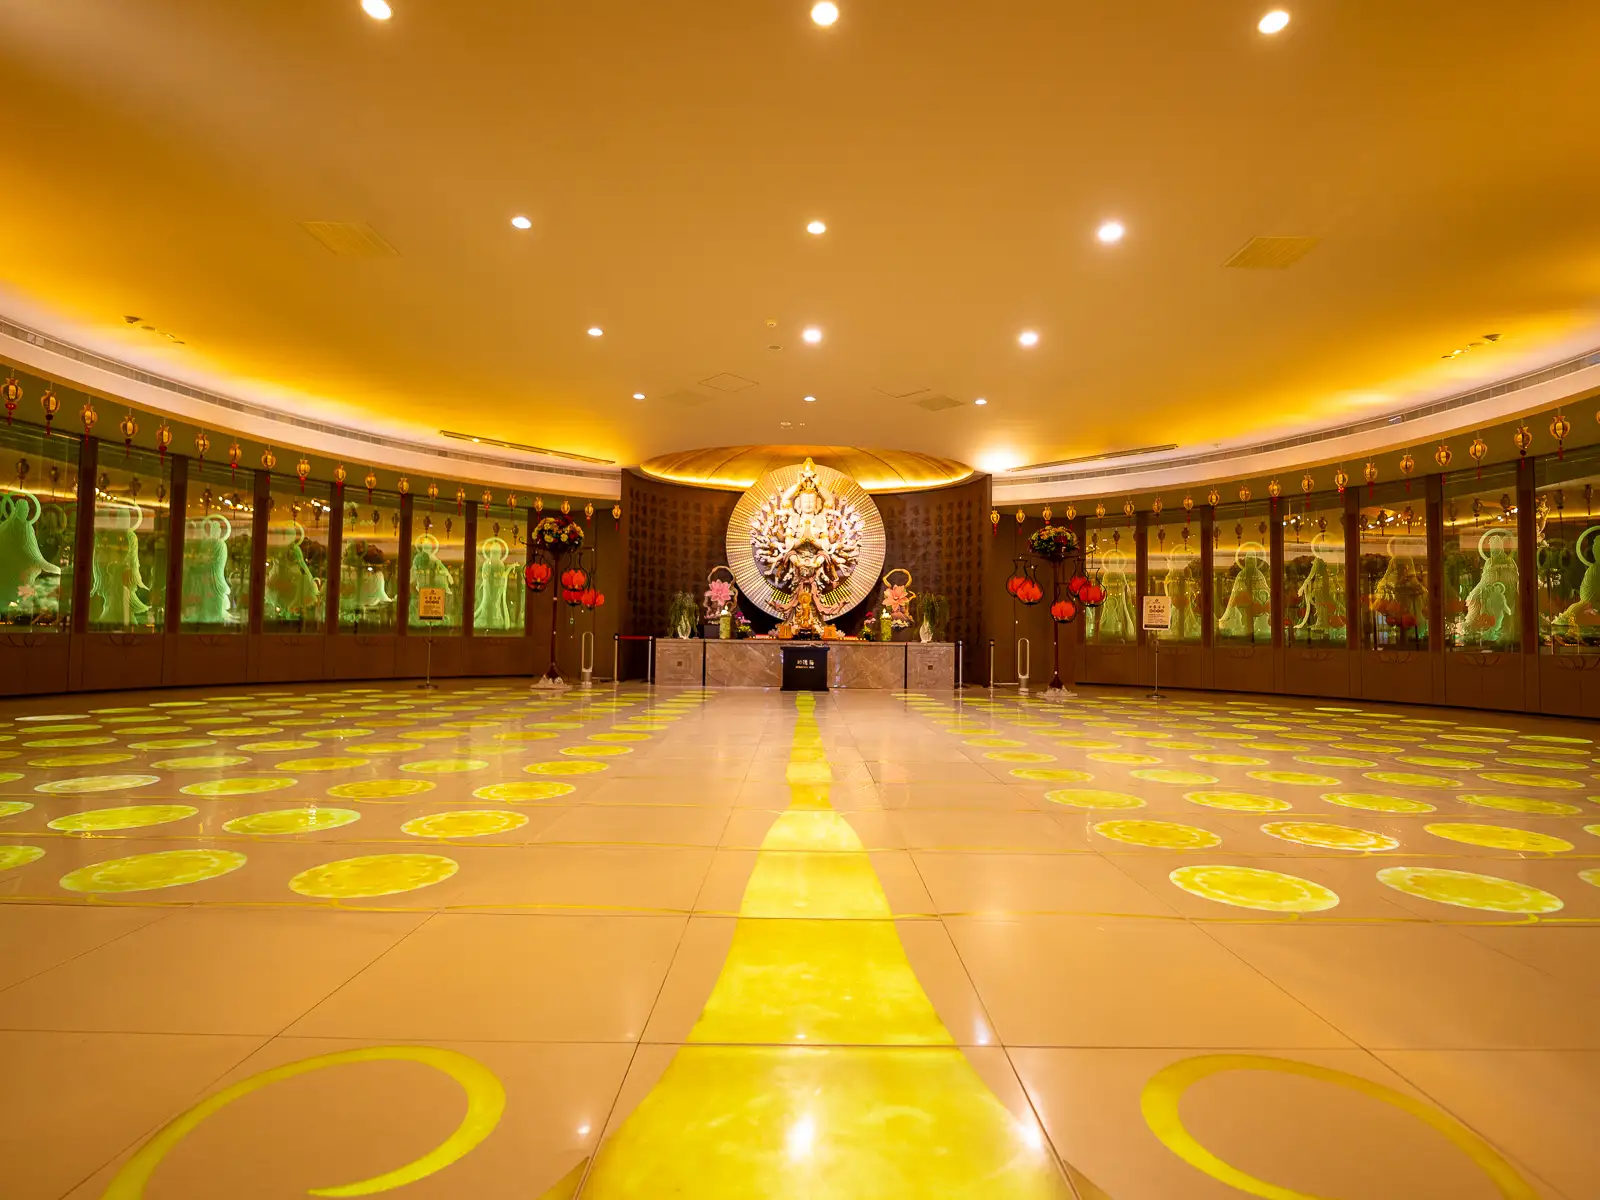 A Thousand-Armed, Thousand-Eyed Avalokitesvara Bodhisattva statue sits at the far end of a circular room.